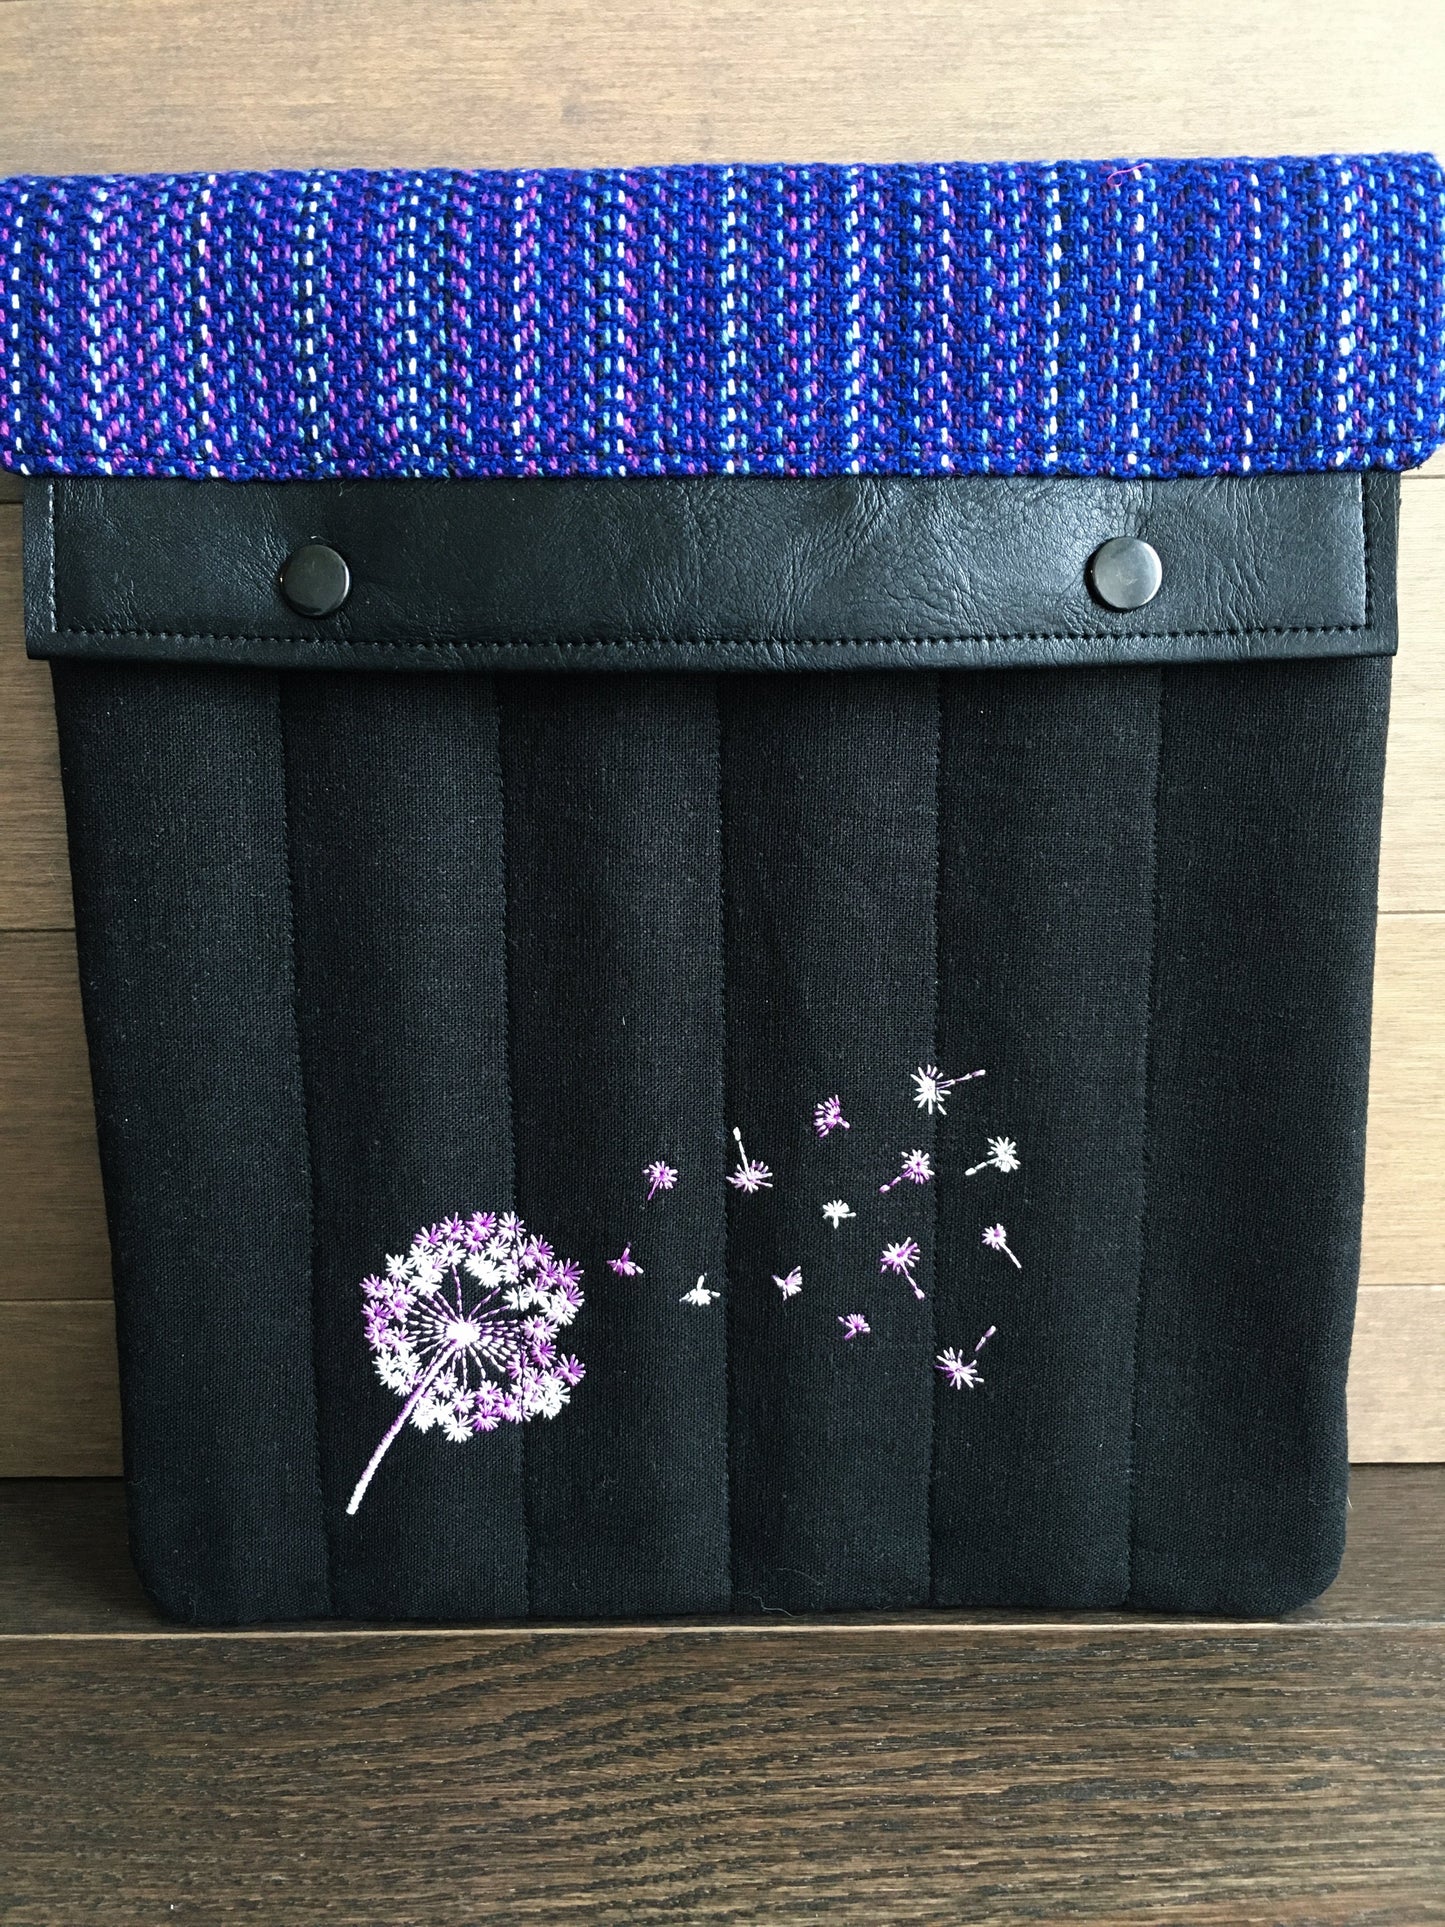 Violet Rainbow Dandelions Large Needle Wallet and Organizer